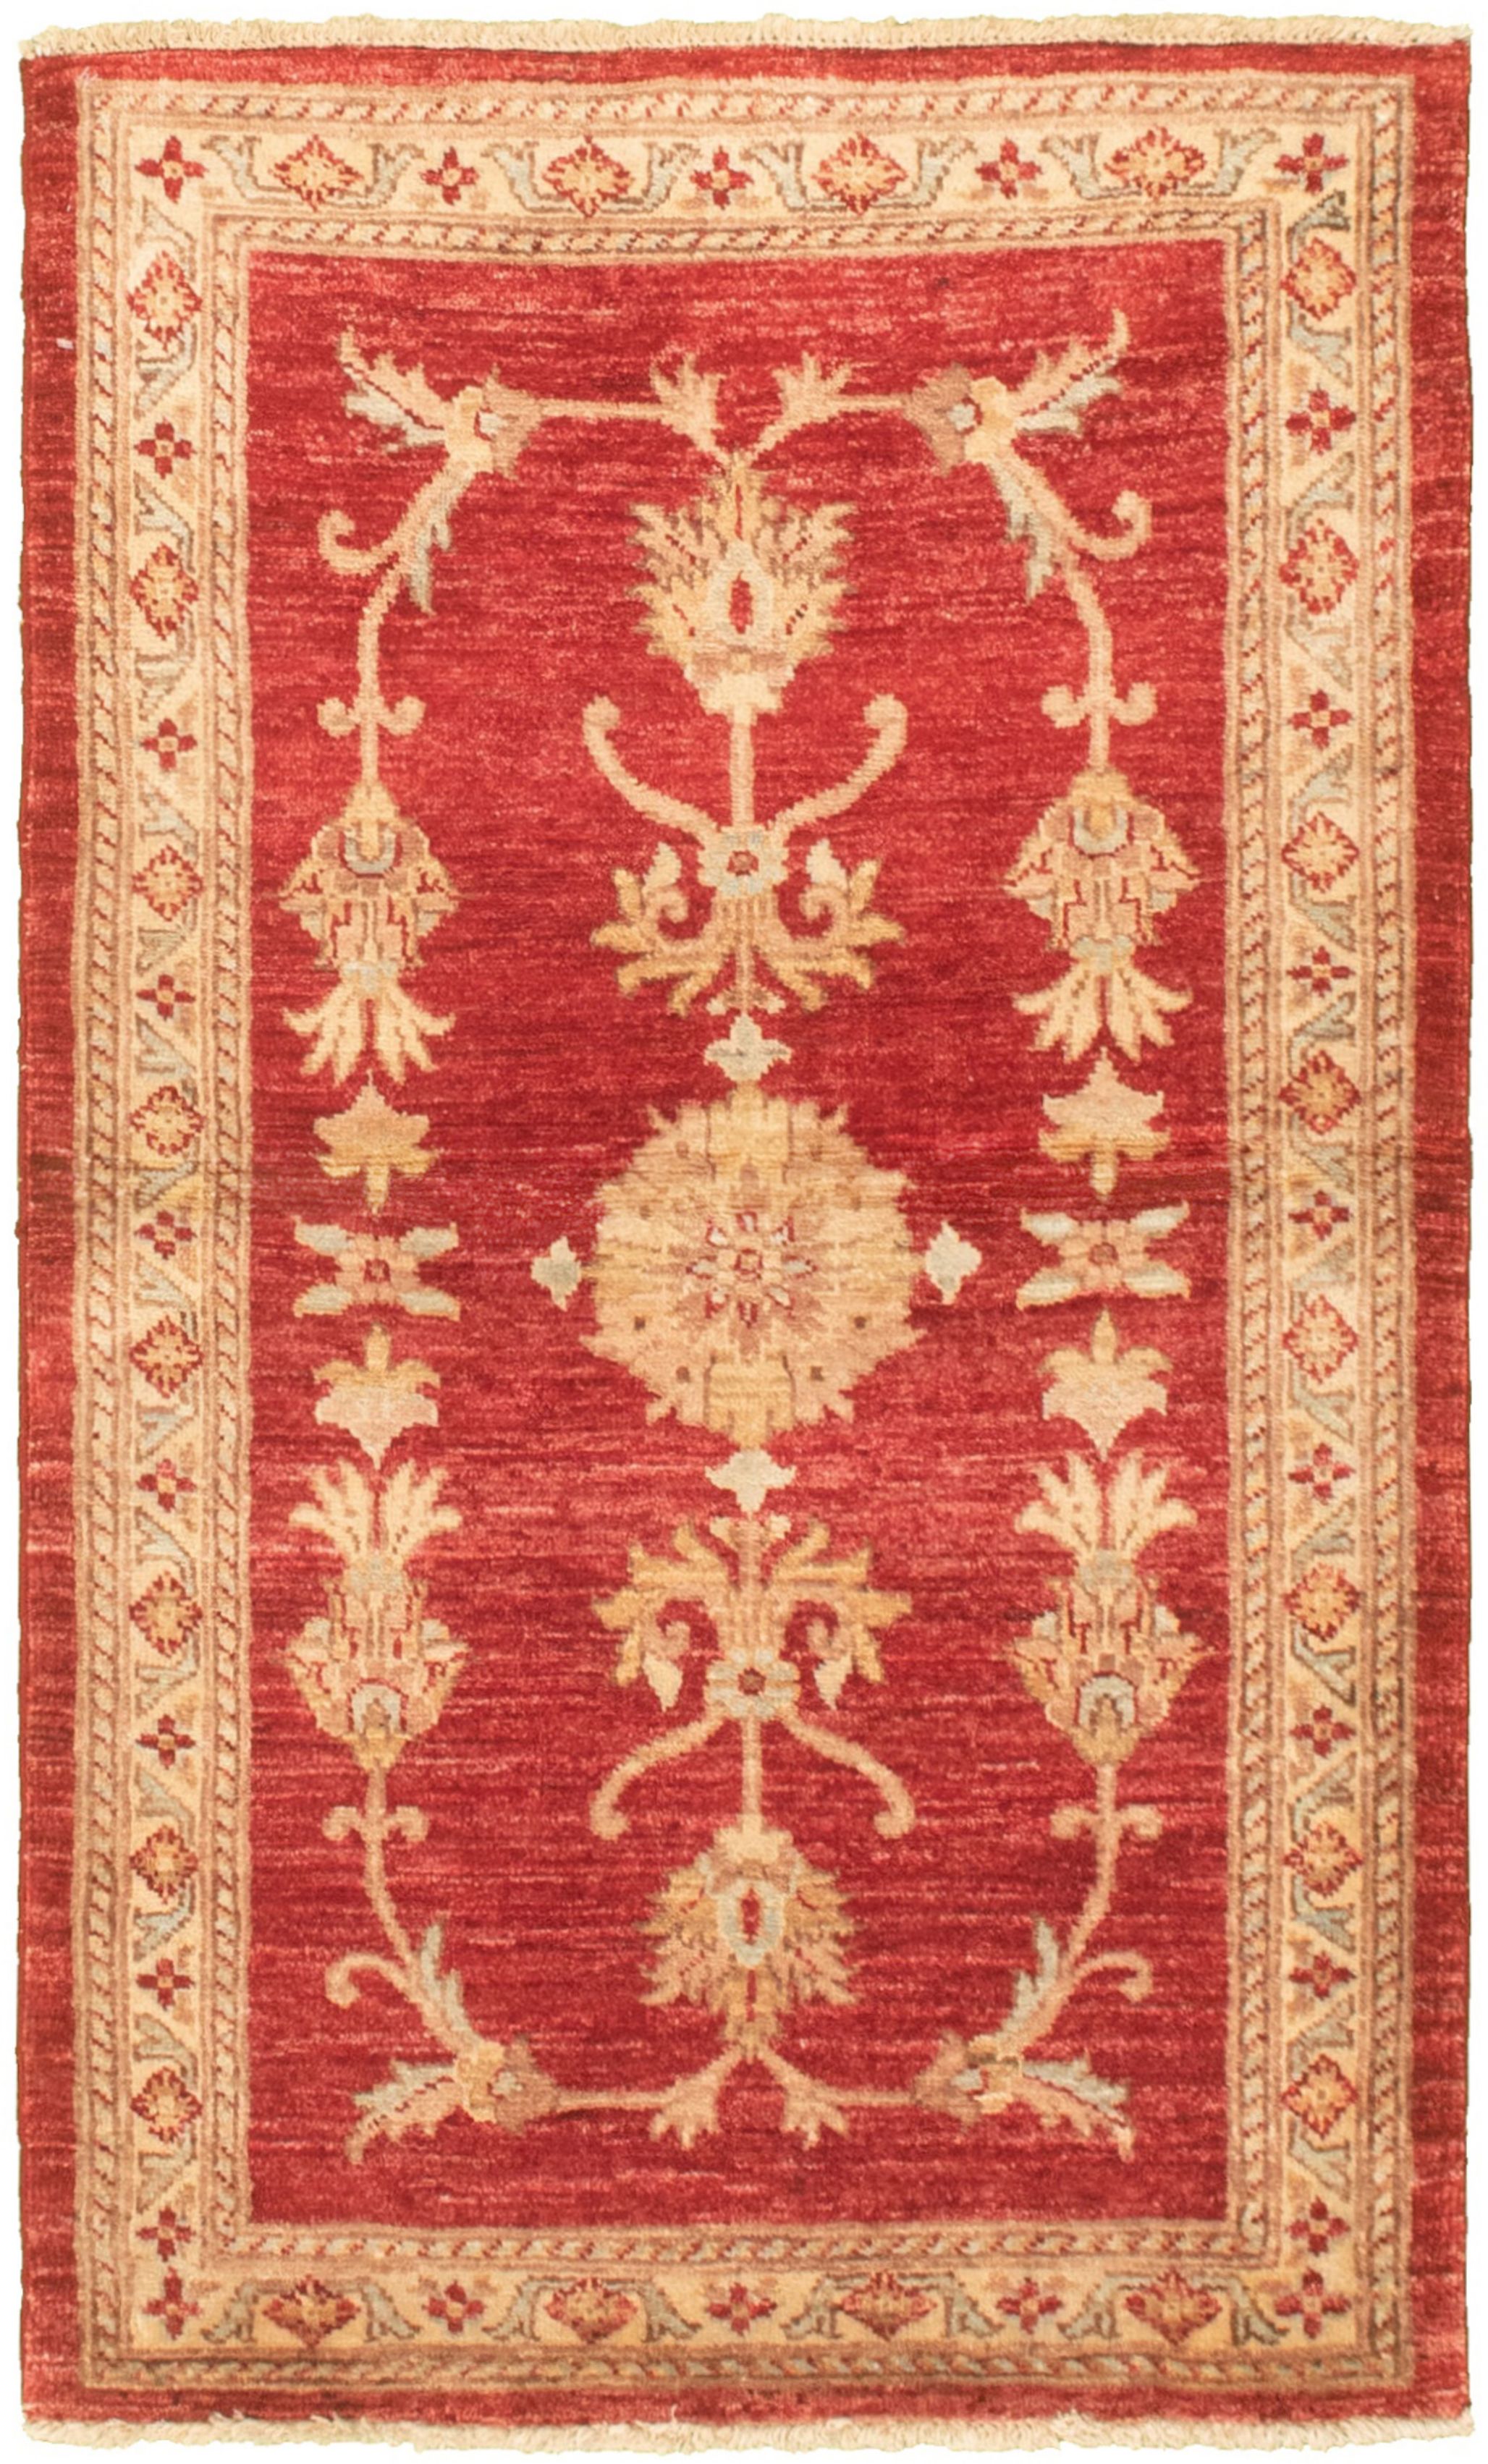 Hand-knotted Chobi Finest Burgundy Wool Rug 2'9" x 4'8" Size: 2'9" x 4'8"  